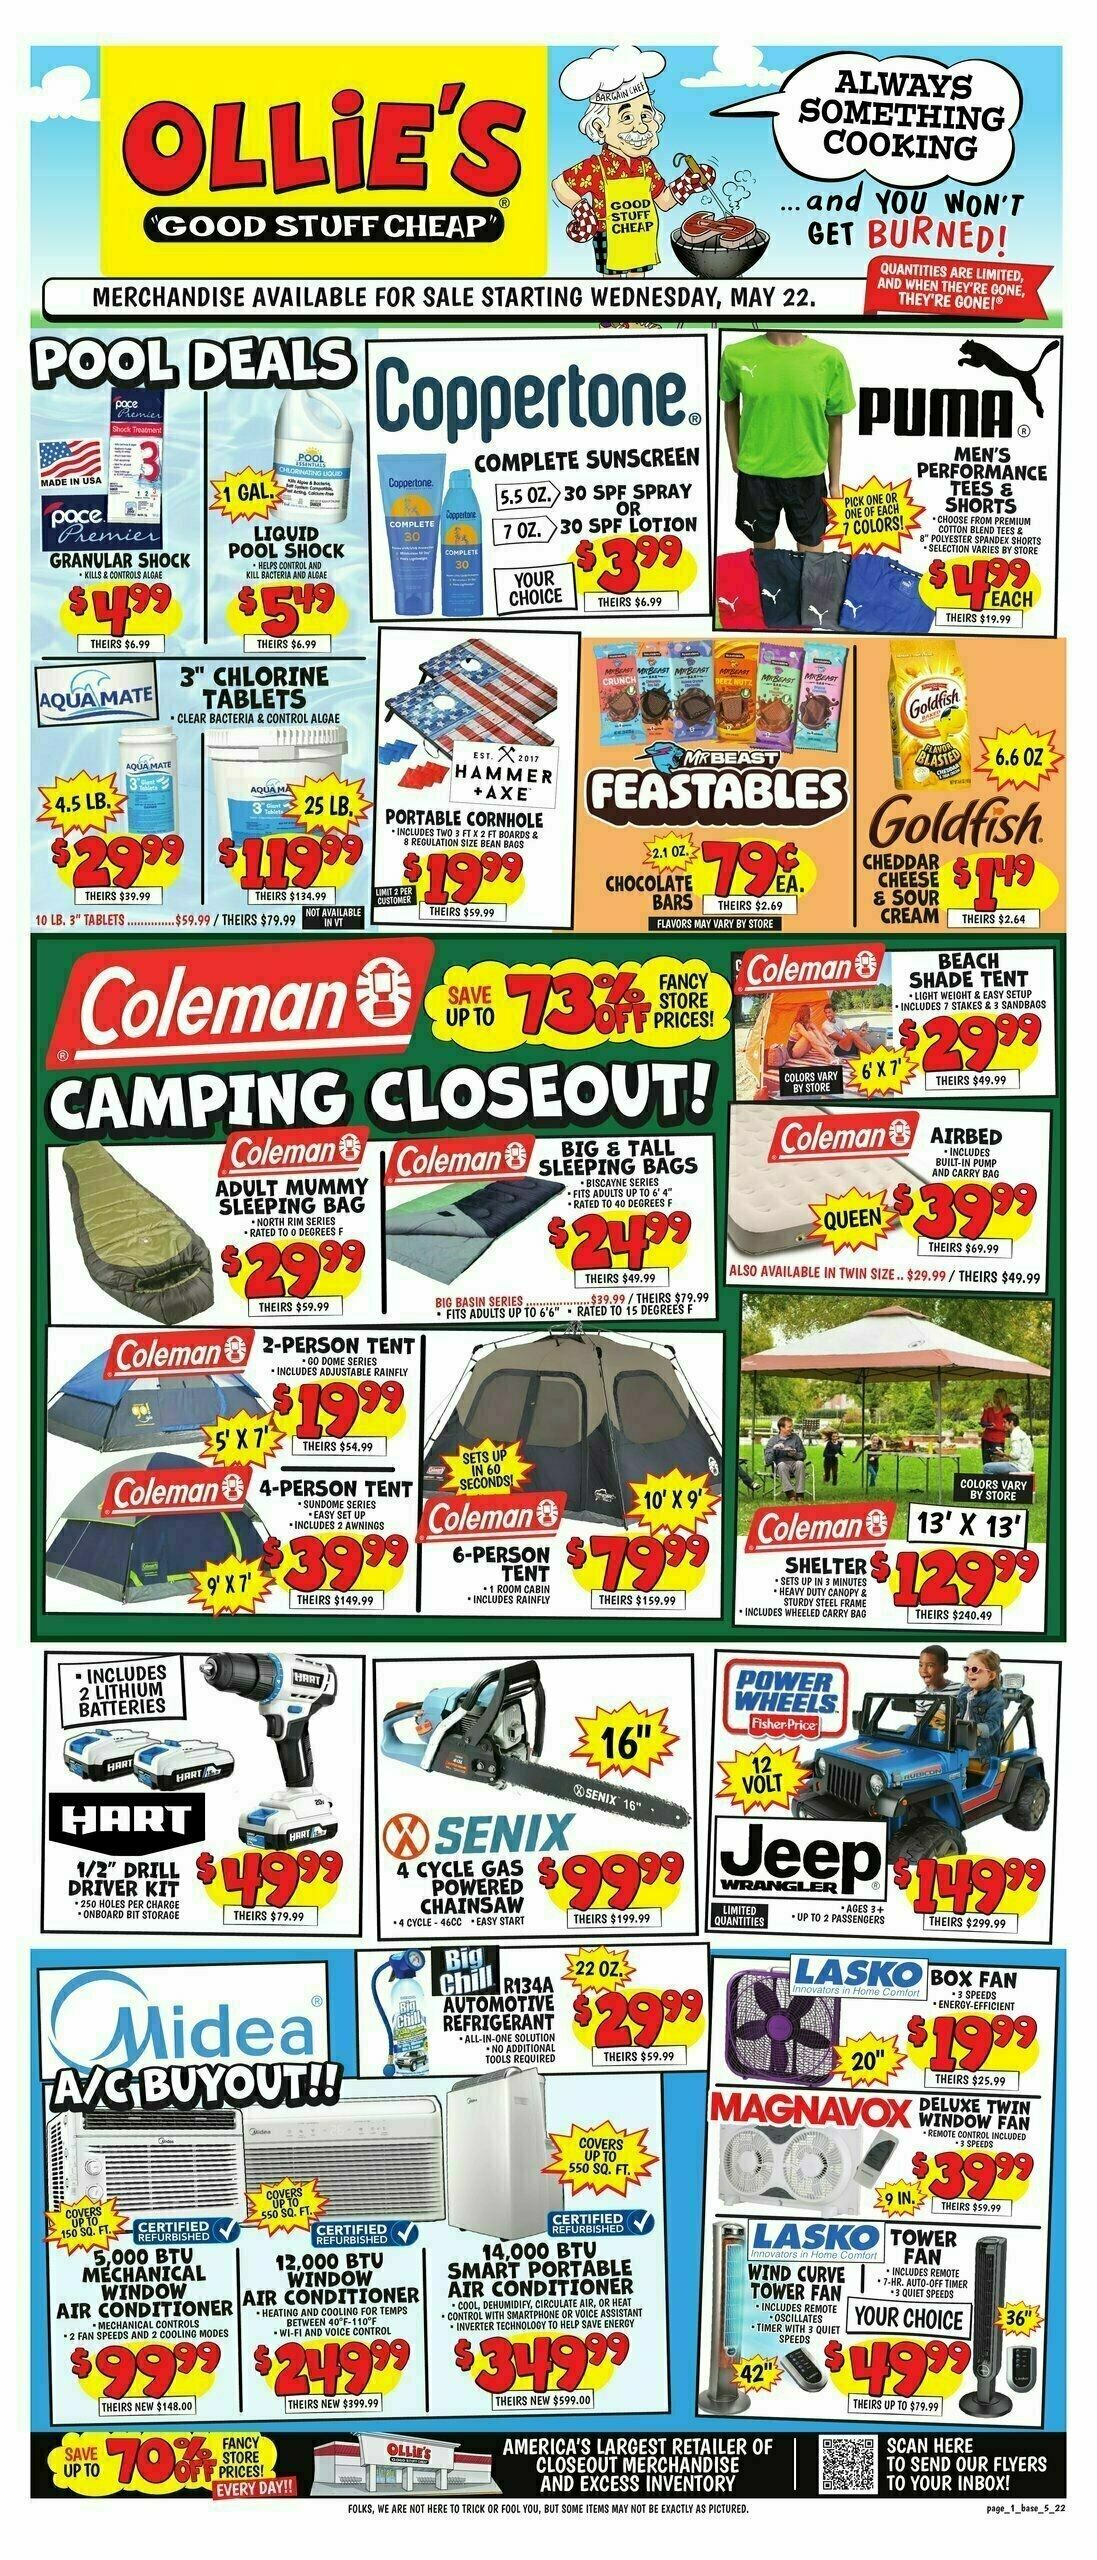 Ollie's Bargain Outlet Weekly Ad from May 22